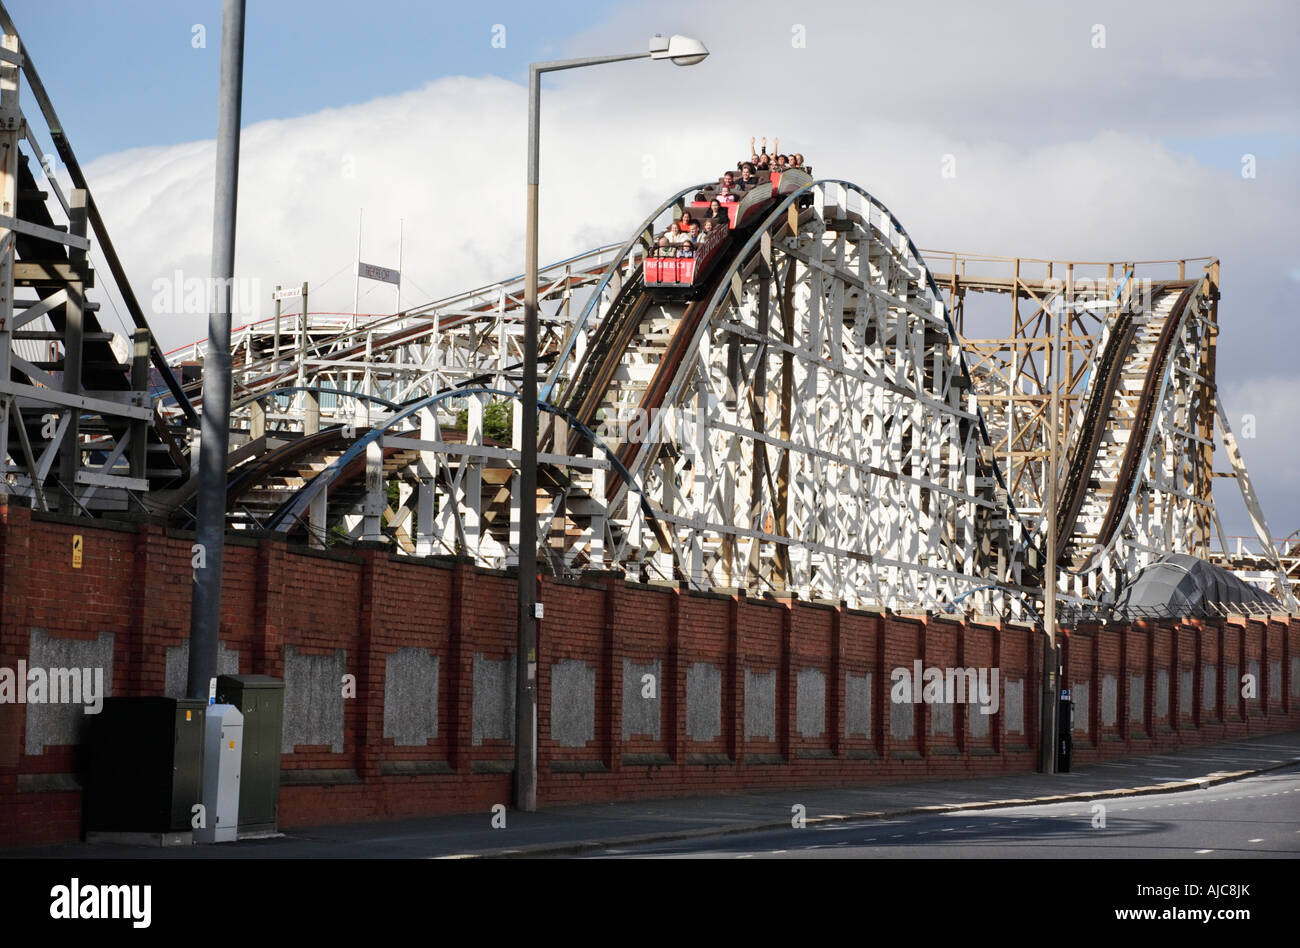 A roller coaster at Blackpool Pleasure Beach, UK, seen from a back street Stock Photo